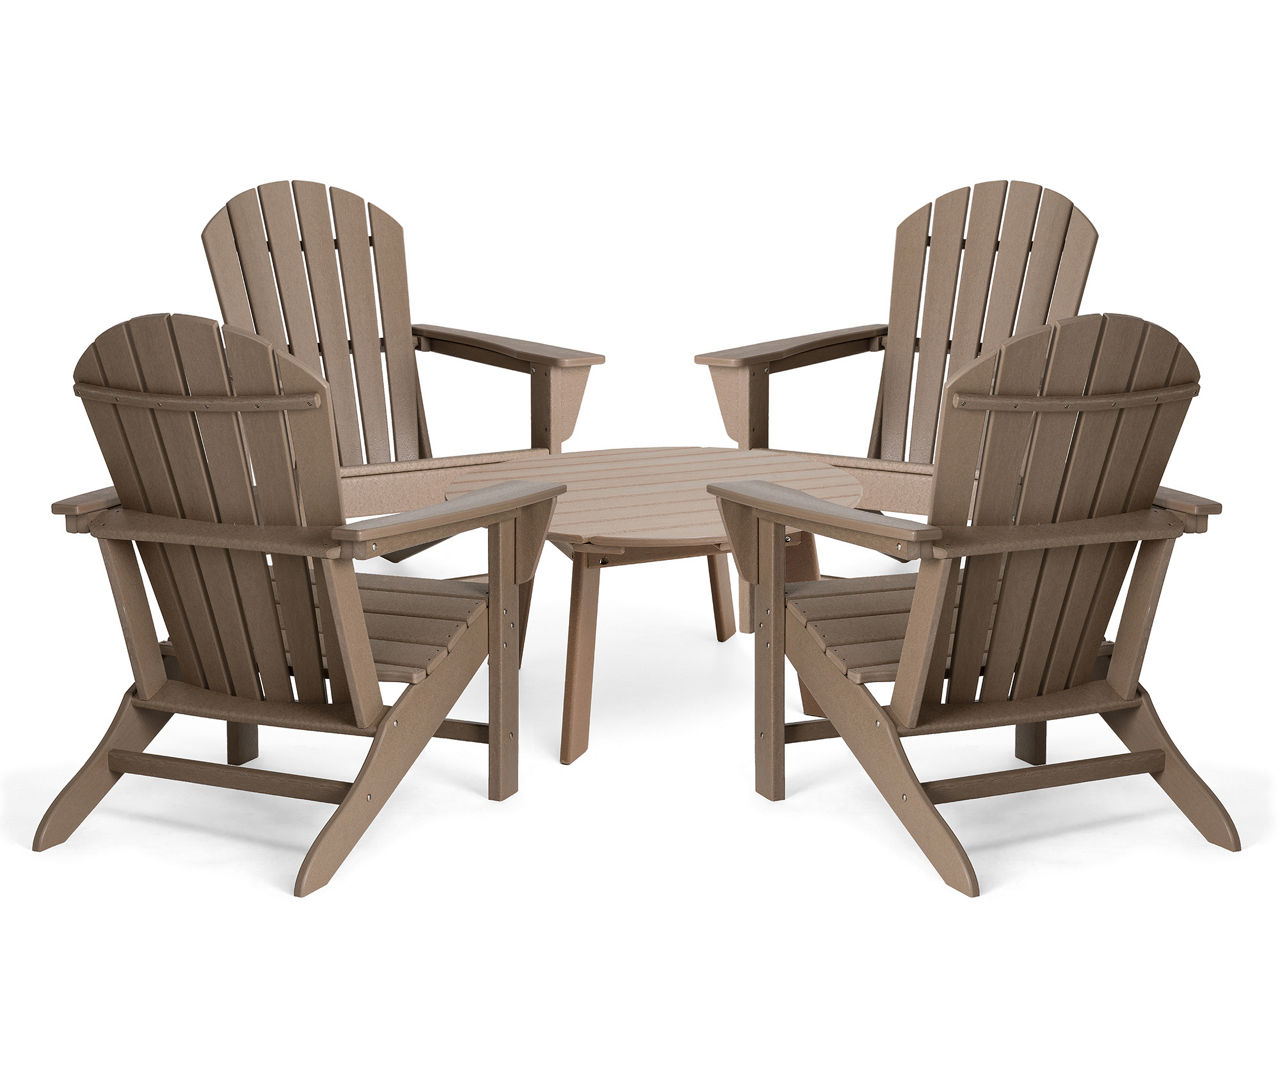 5-Piece Outdoor Patio Tan HDPE Adirondack Chair and Coffee Table Set1pc 36"D Coffee Table4pcs Adirondack Chairs (KD)